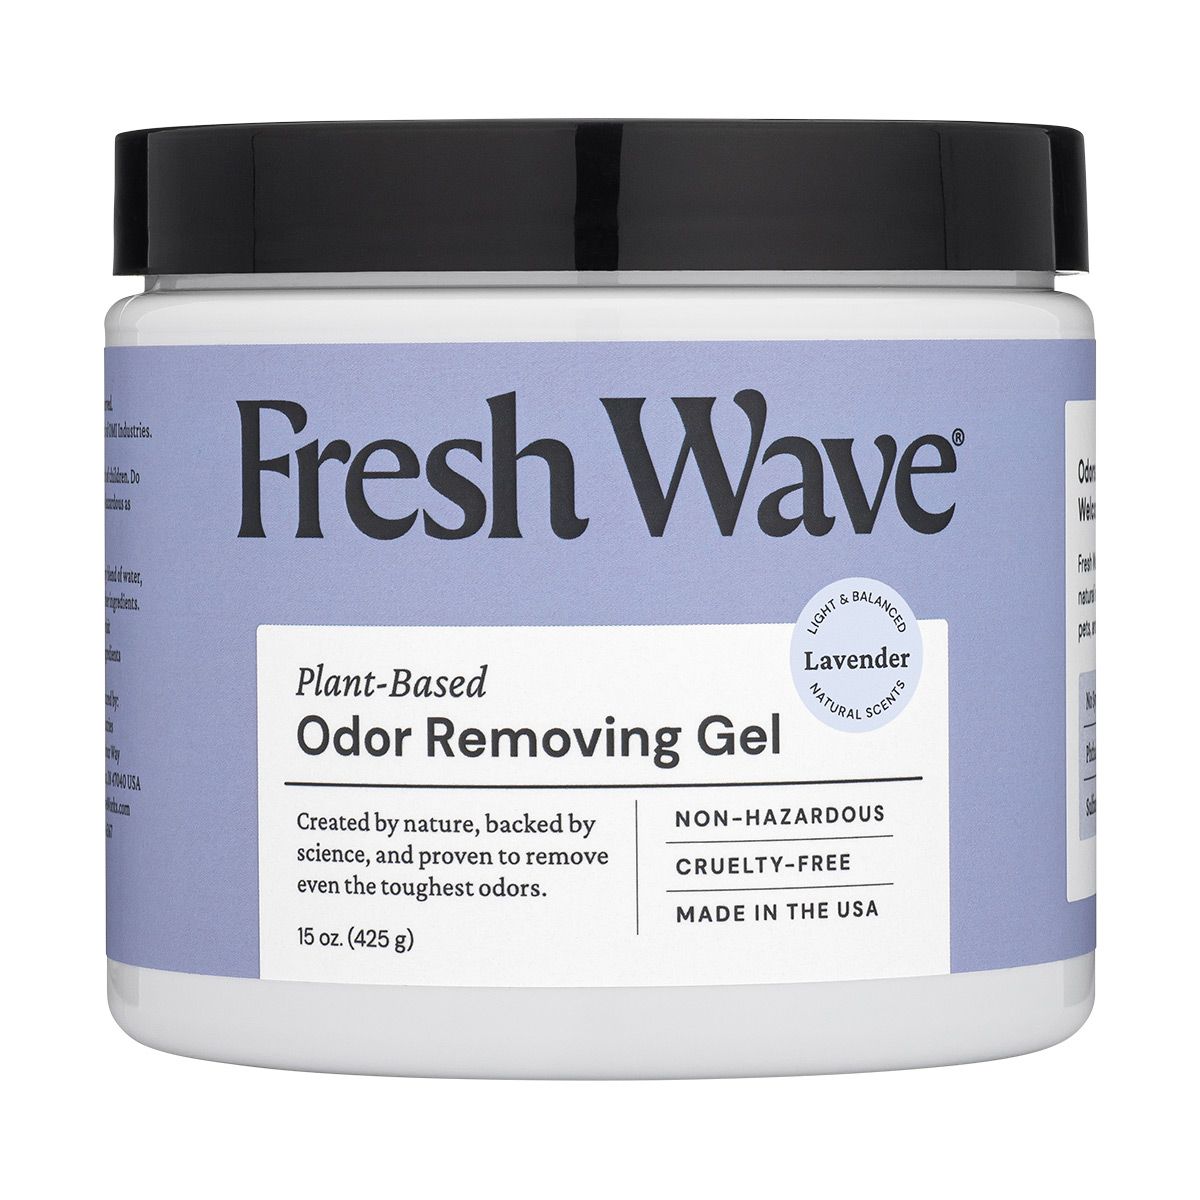 Fresh Wave 15 oz. Crystal Gel Lavender | The Container Store